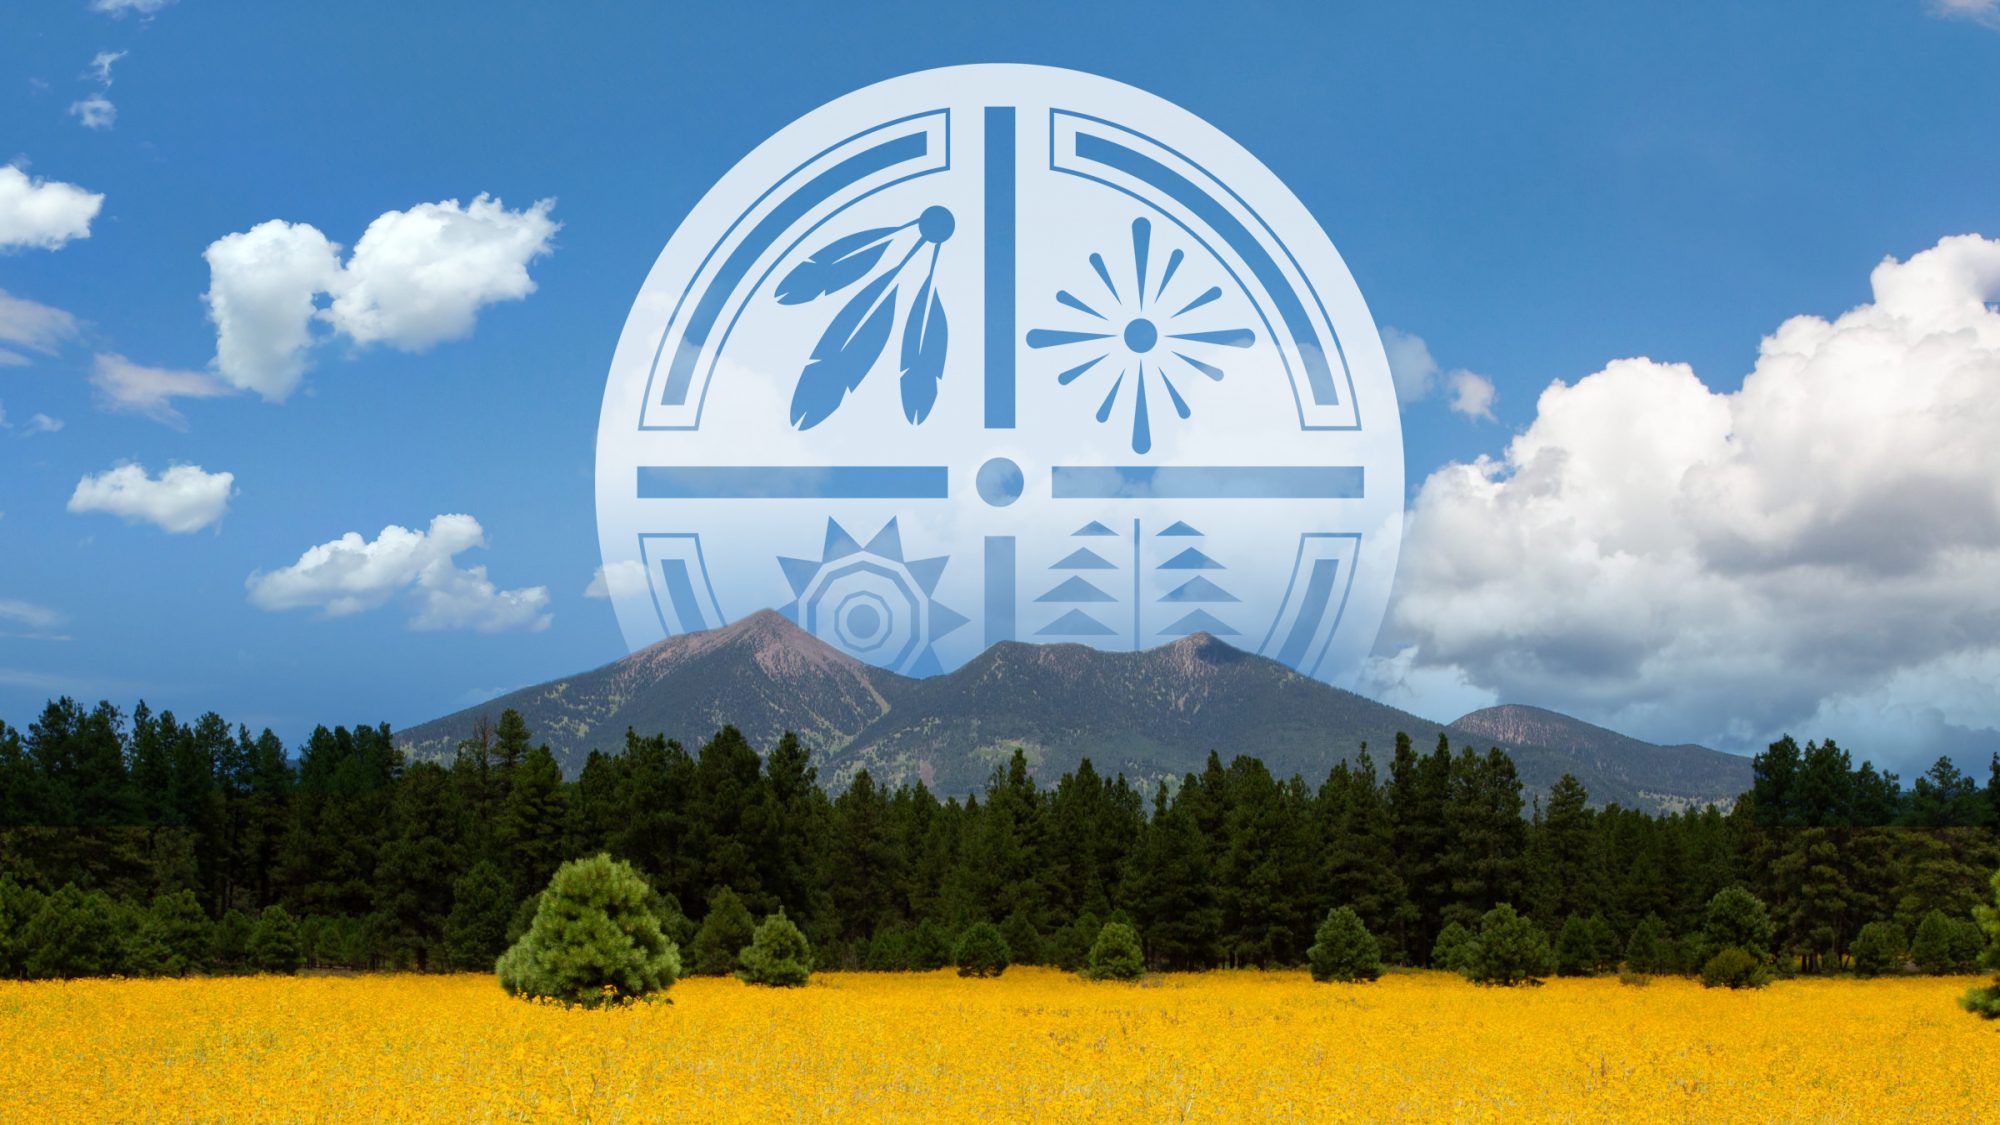 An image of the San Francisco Peaks with a graphic of Indigenous values superimposed on the sky.